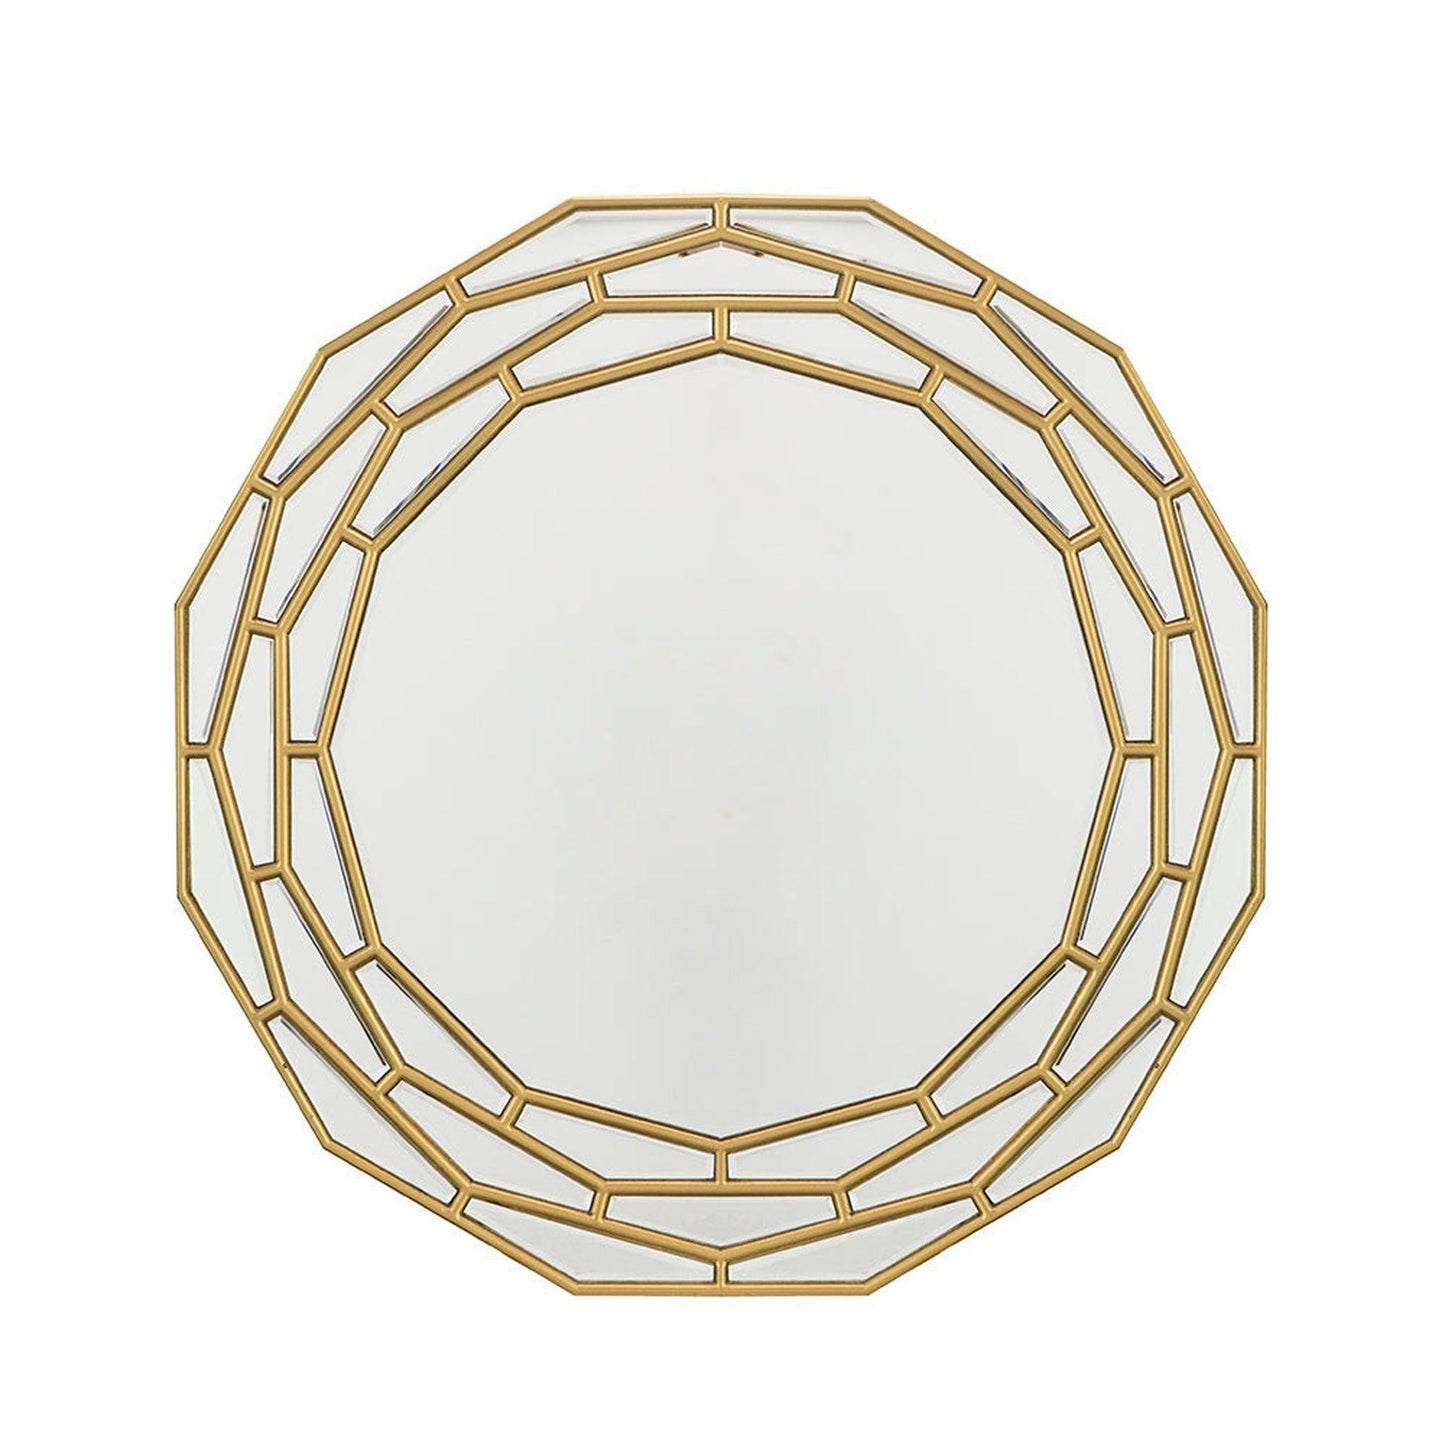 A&B Home 35" x 35" Bundle of 5 Round Brushed Metallic Gold Wooden Frame Wall-Mounted Mirror